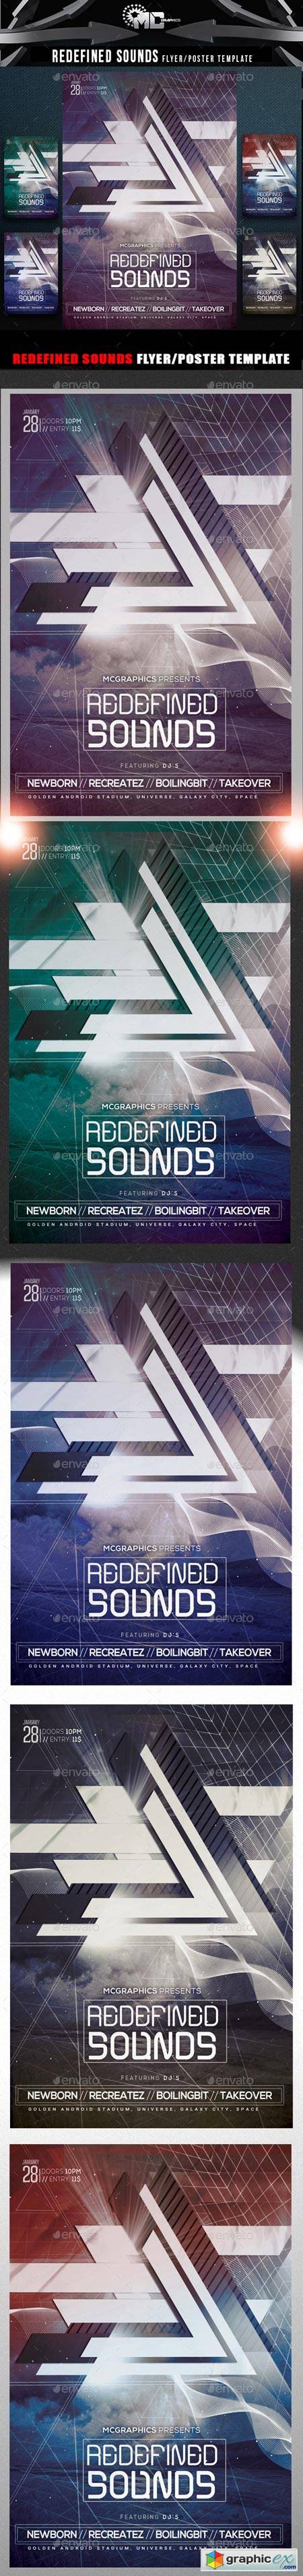 Redefined Sounds Flyer Template 8996117